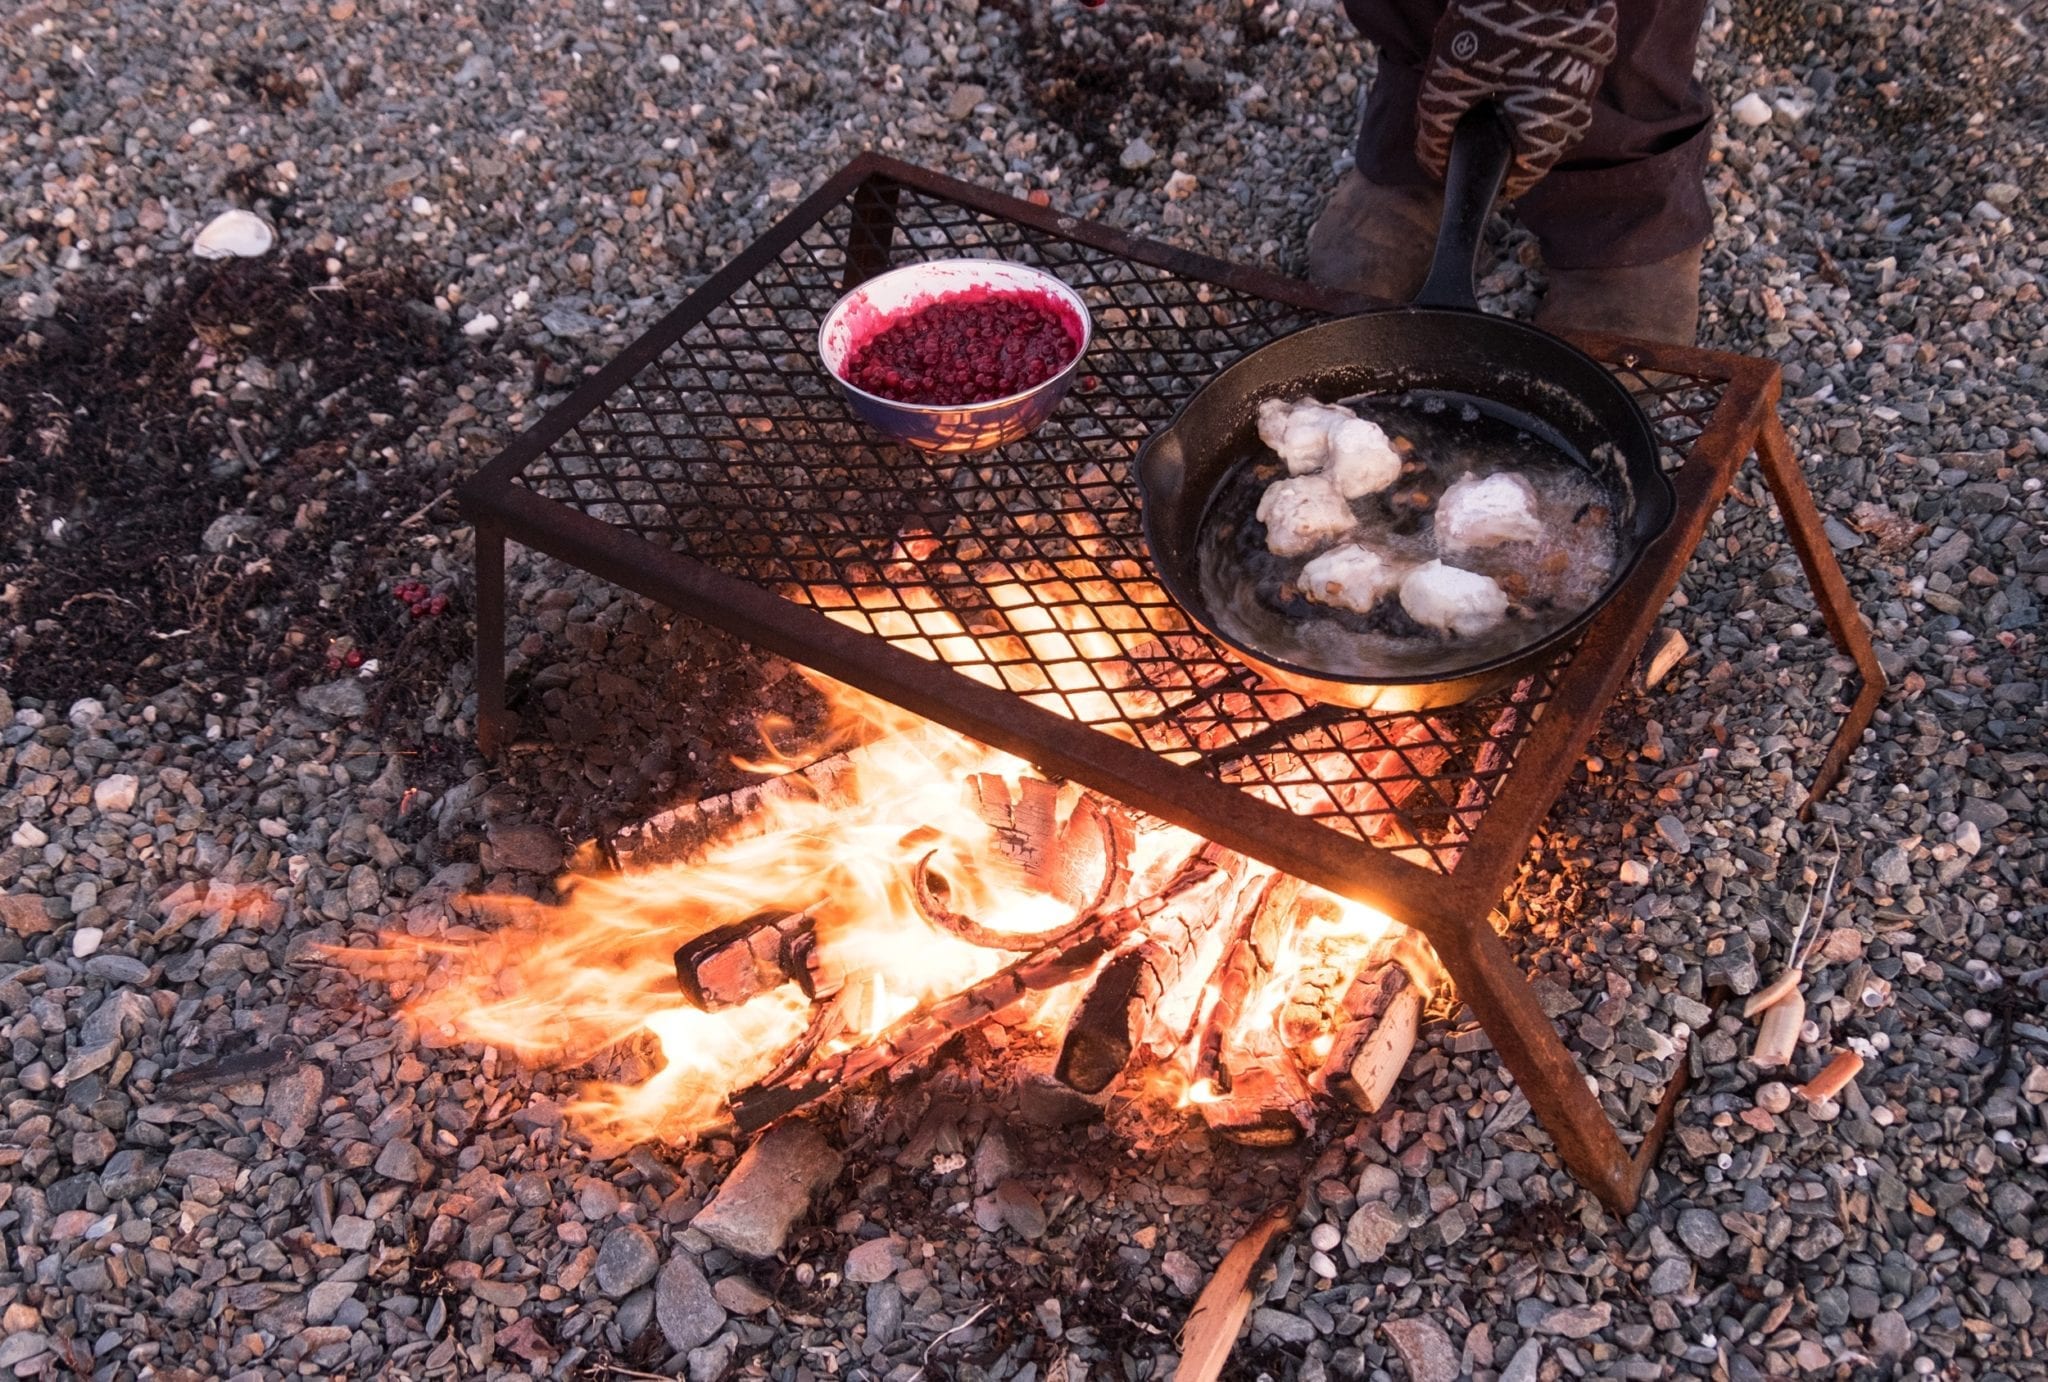 A campfire with a grill on top: cod tongues cooking in a skillet on one side, berries cooking in a dish on the other.